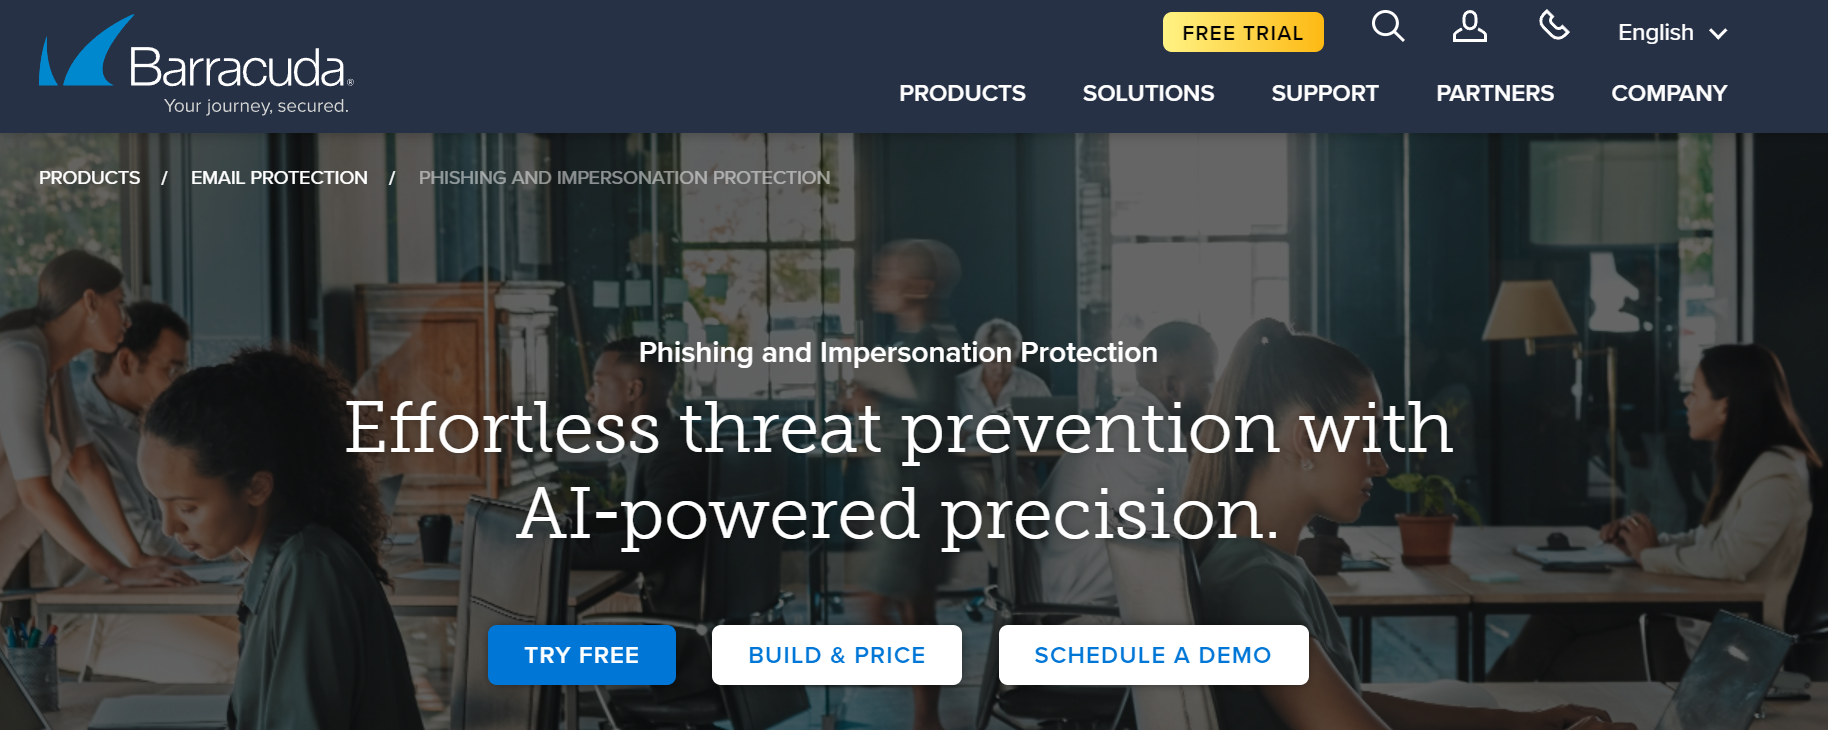 Barracadua's landing page for it's phishing protection service says it provides "effortless threat prevention with AI-powered precision."